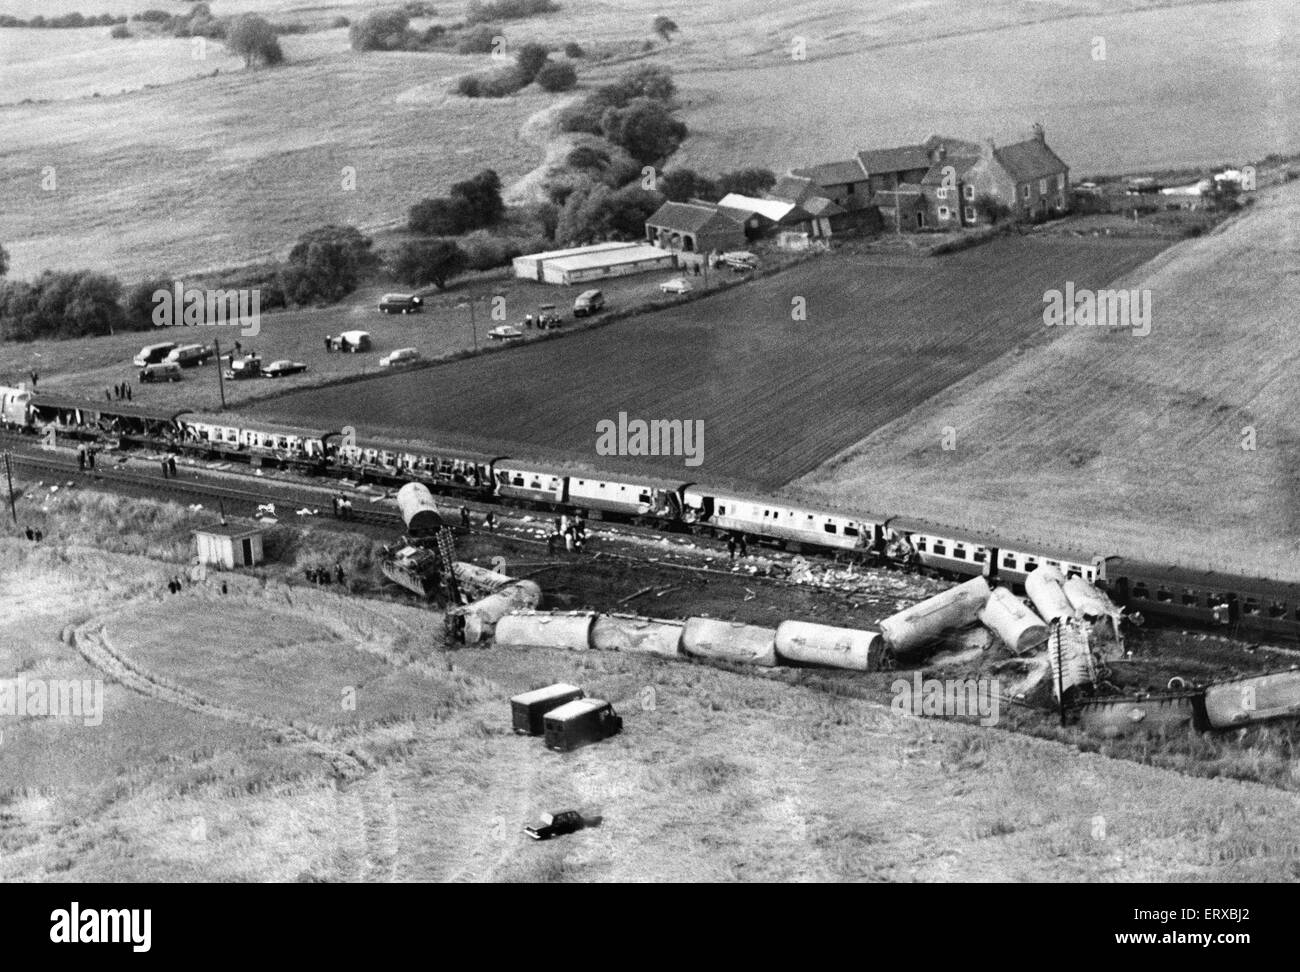 Topcliffe, Thirsk train crash. Aerial view of the 12.00 express train from King's Cross to Edinburgh which collided at speed with the wreckage of a derailed freight train around 15:17 on that day. Seven people were killed and 45 injured, 15 seriously.  31st July 1967 Stock Photo